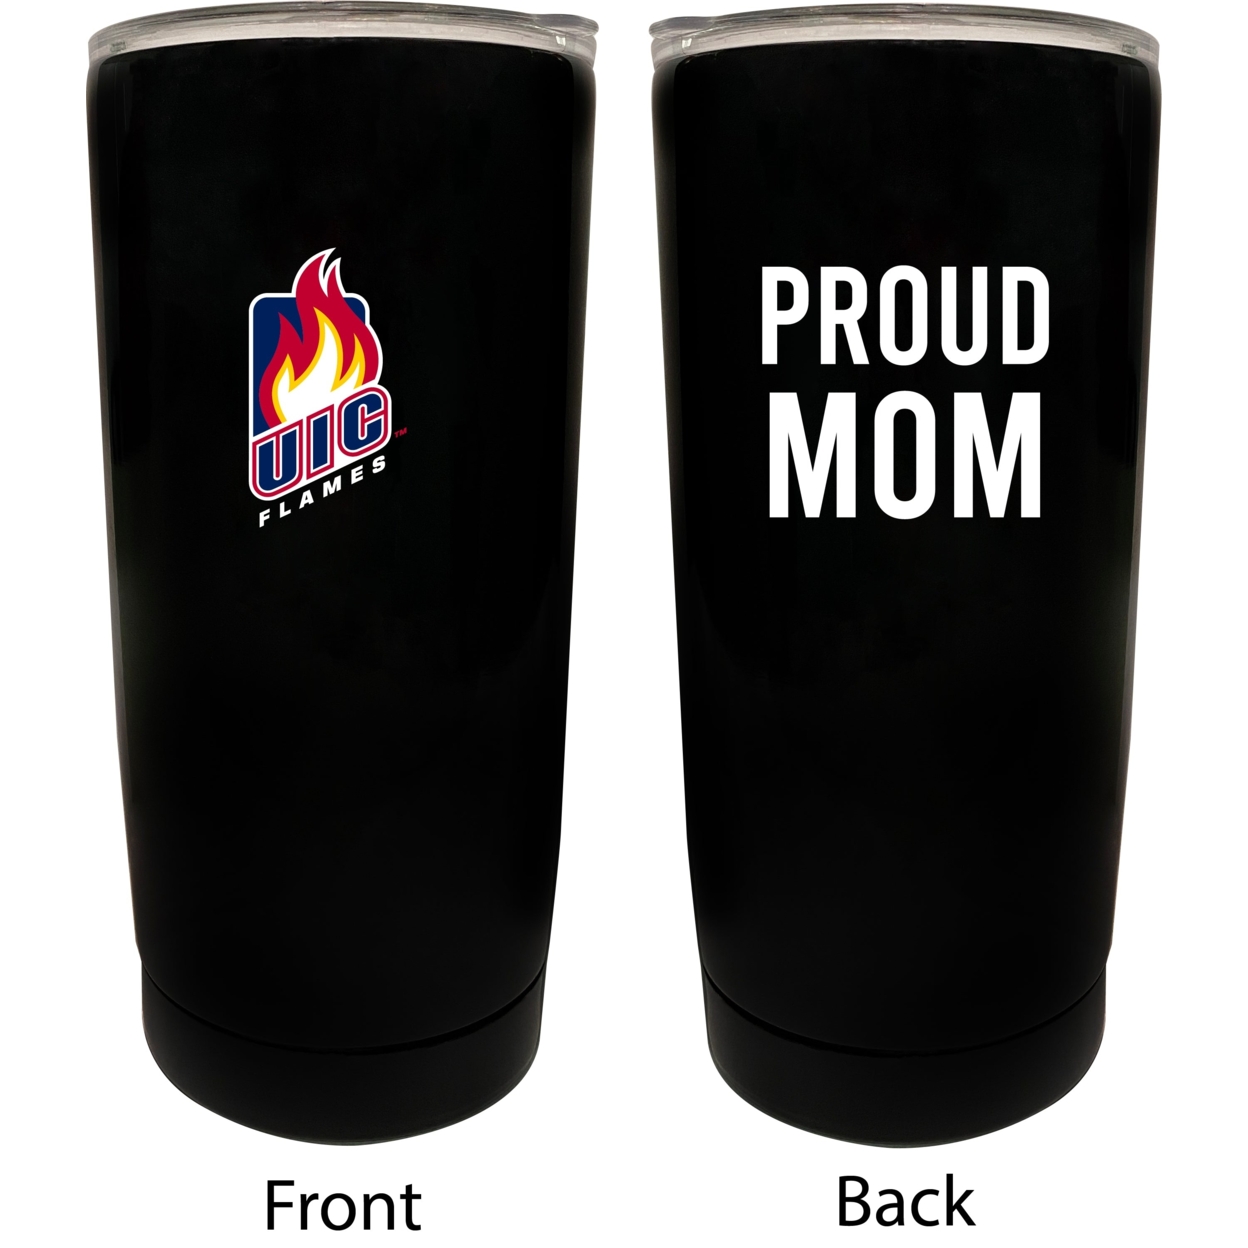 University Of Illinois At Chicago Proud Mom 16 Oz Insulated Stainless Steel Tumblers